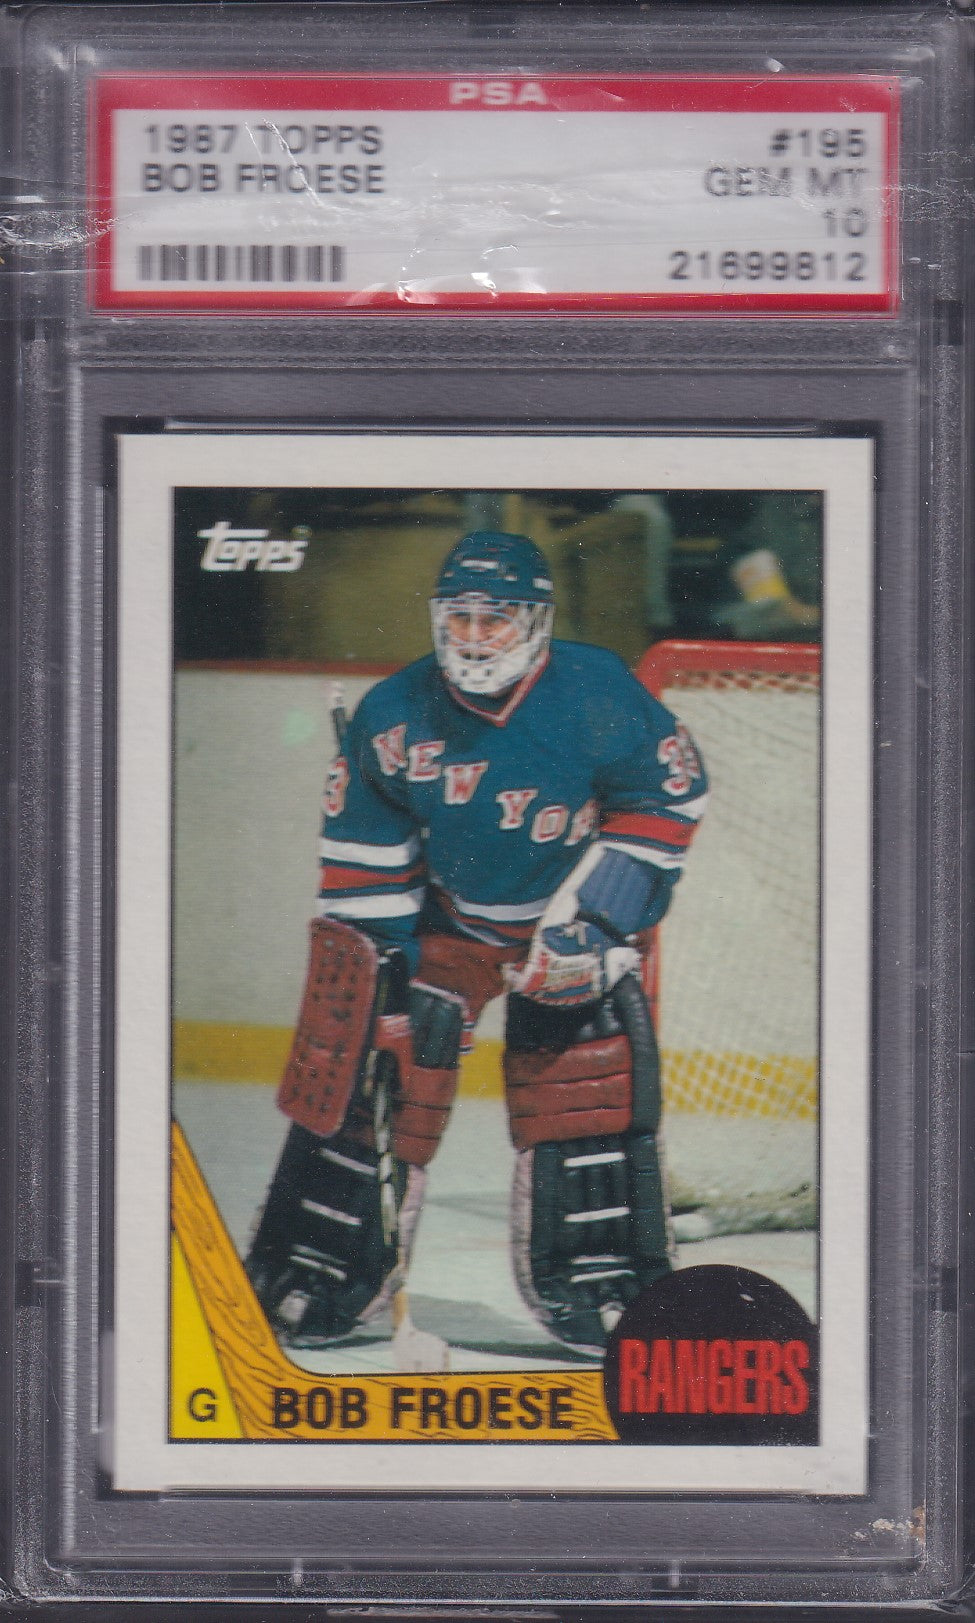 BOB FROESE, 1987 Topps #195, PSA 10